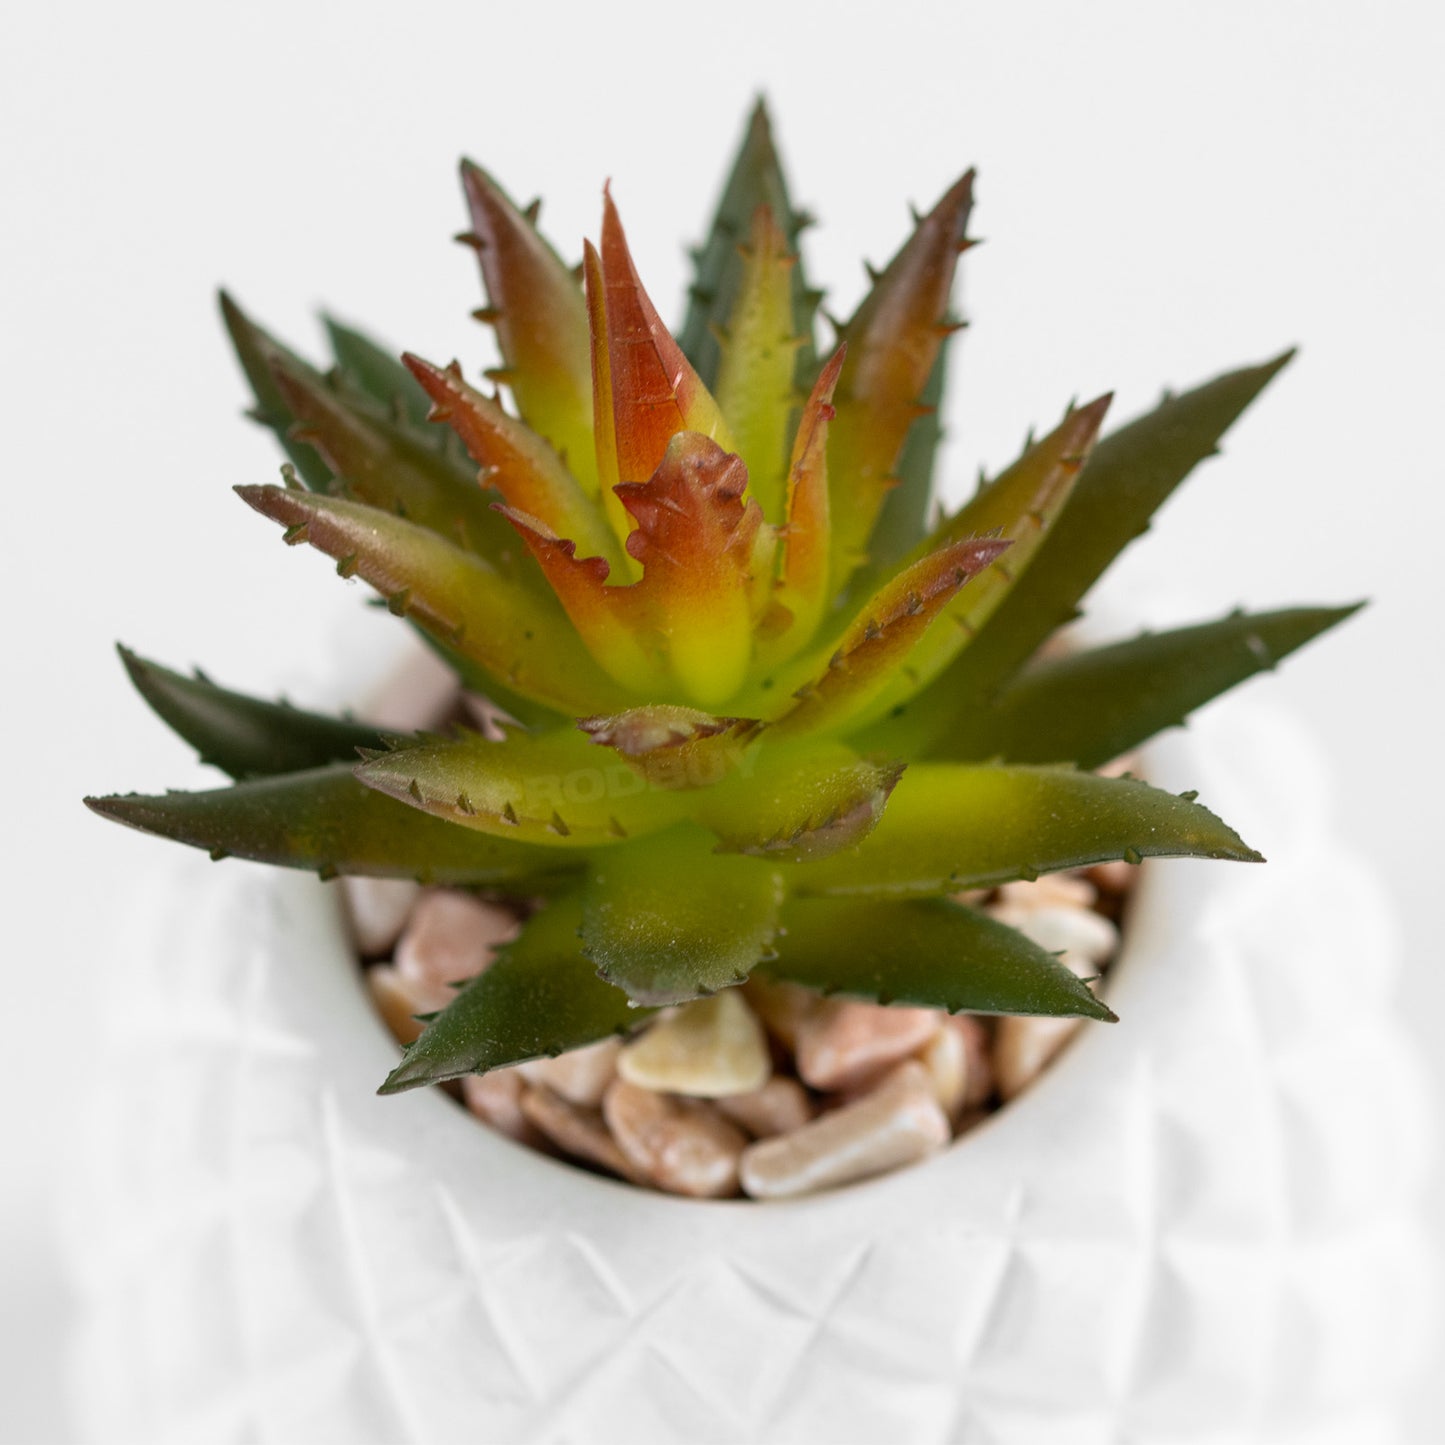 12cm Artificial Succulent Indoor House Plant White Pineapple